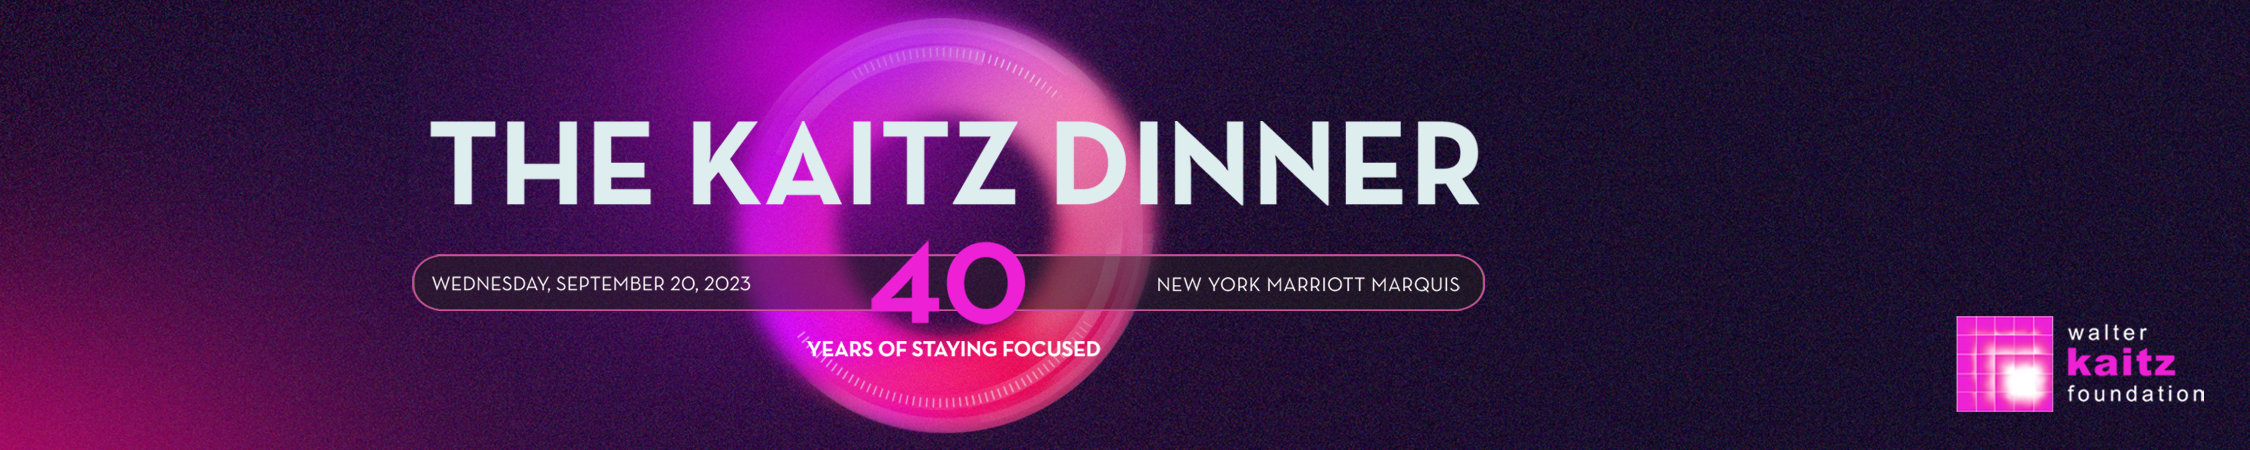 Kaitz Dinner - Sept 20, 2023 - Tables & Tickets Available Now